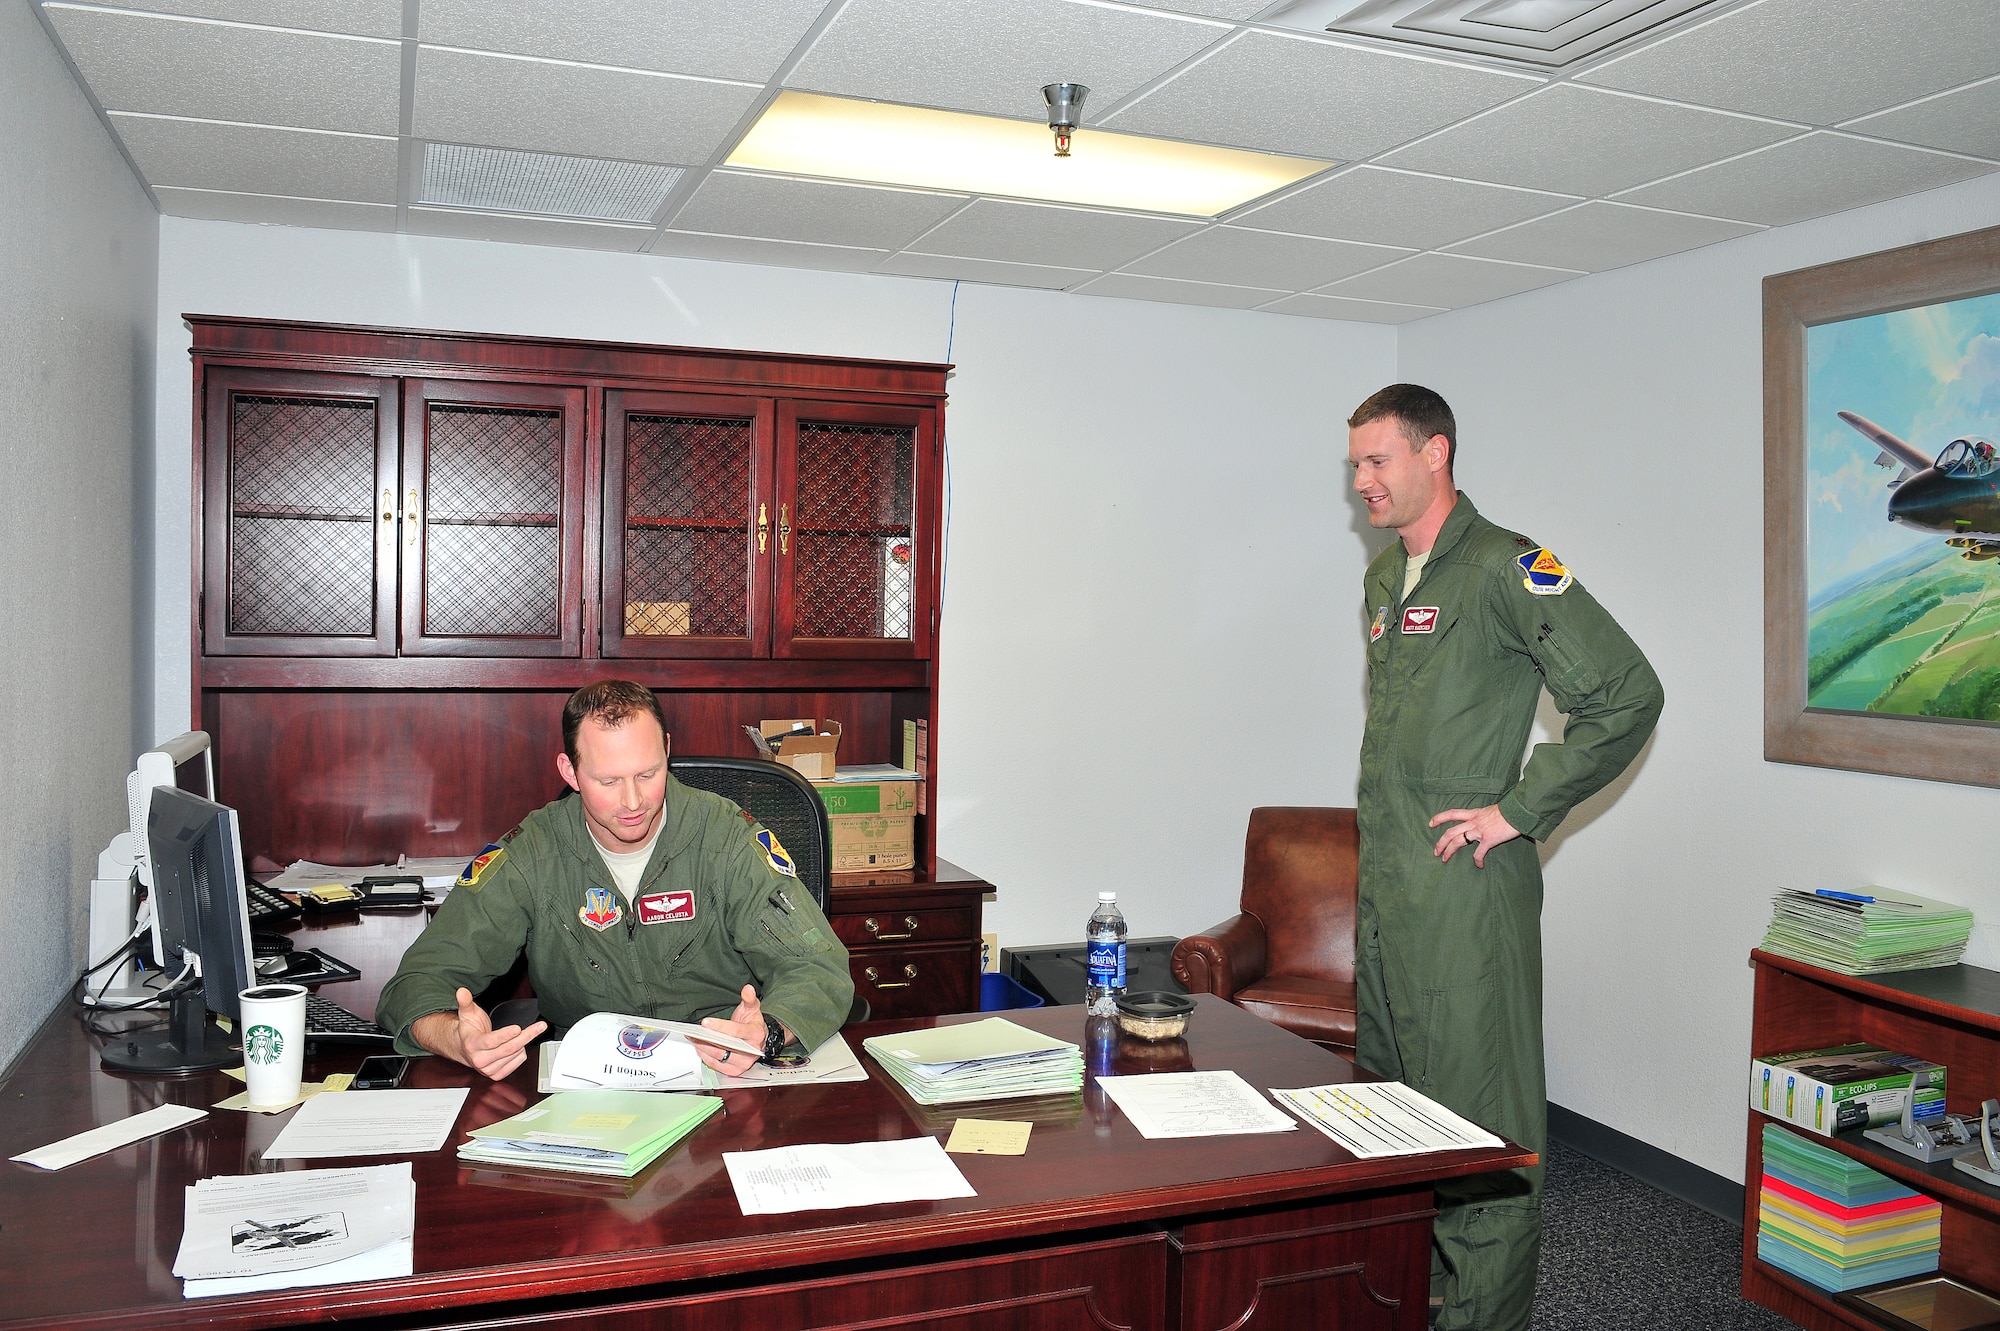 U.S. Air Force Maj Aaron Celusta (left), 355th Operations Group chief of standardization and evaluation, reviews paperwork with Maj Matt Kaercher, 355th Operations Group A-10 pilot on Davis-Monthan Air Force Base, Ariz., Feb 21, 2013. The 355th OG employs 83 A-10C aircraft and an AN/TPS-75 radar system. (U.S. Photo by Airman 1st Class Josh Slavin/Released)